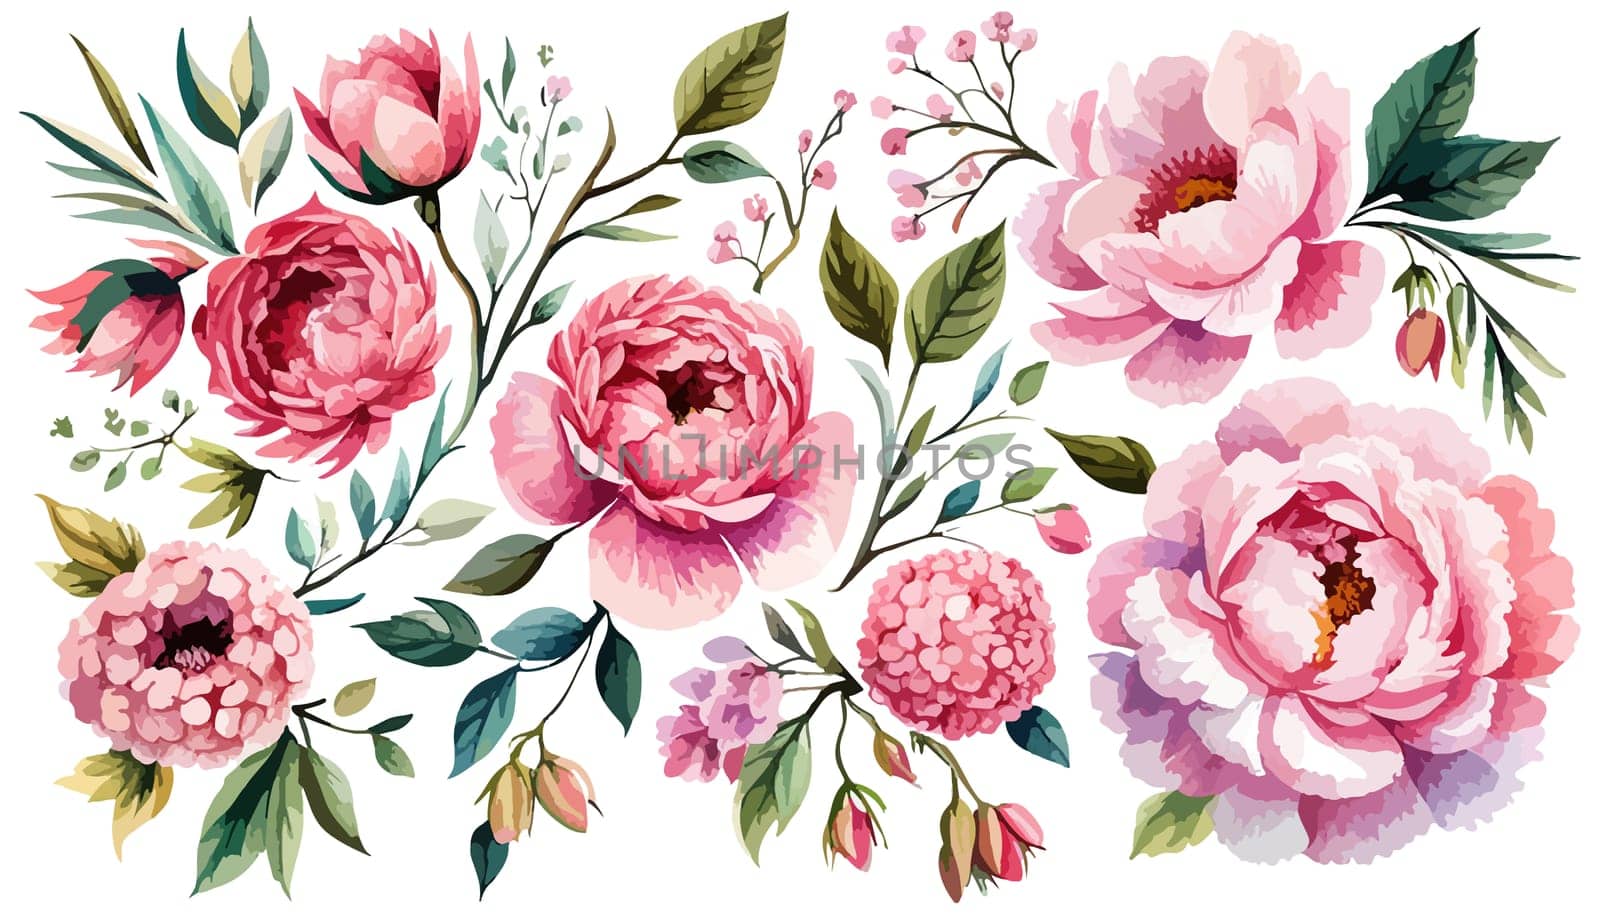 Watercolor flower illustration, pink peony on a white background. Set Peonies flowers illustration